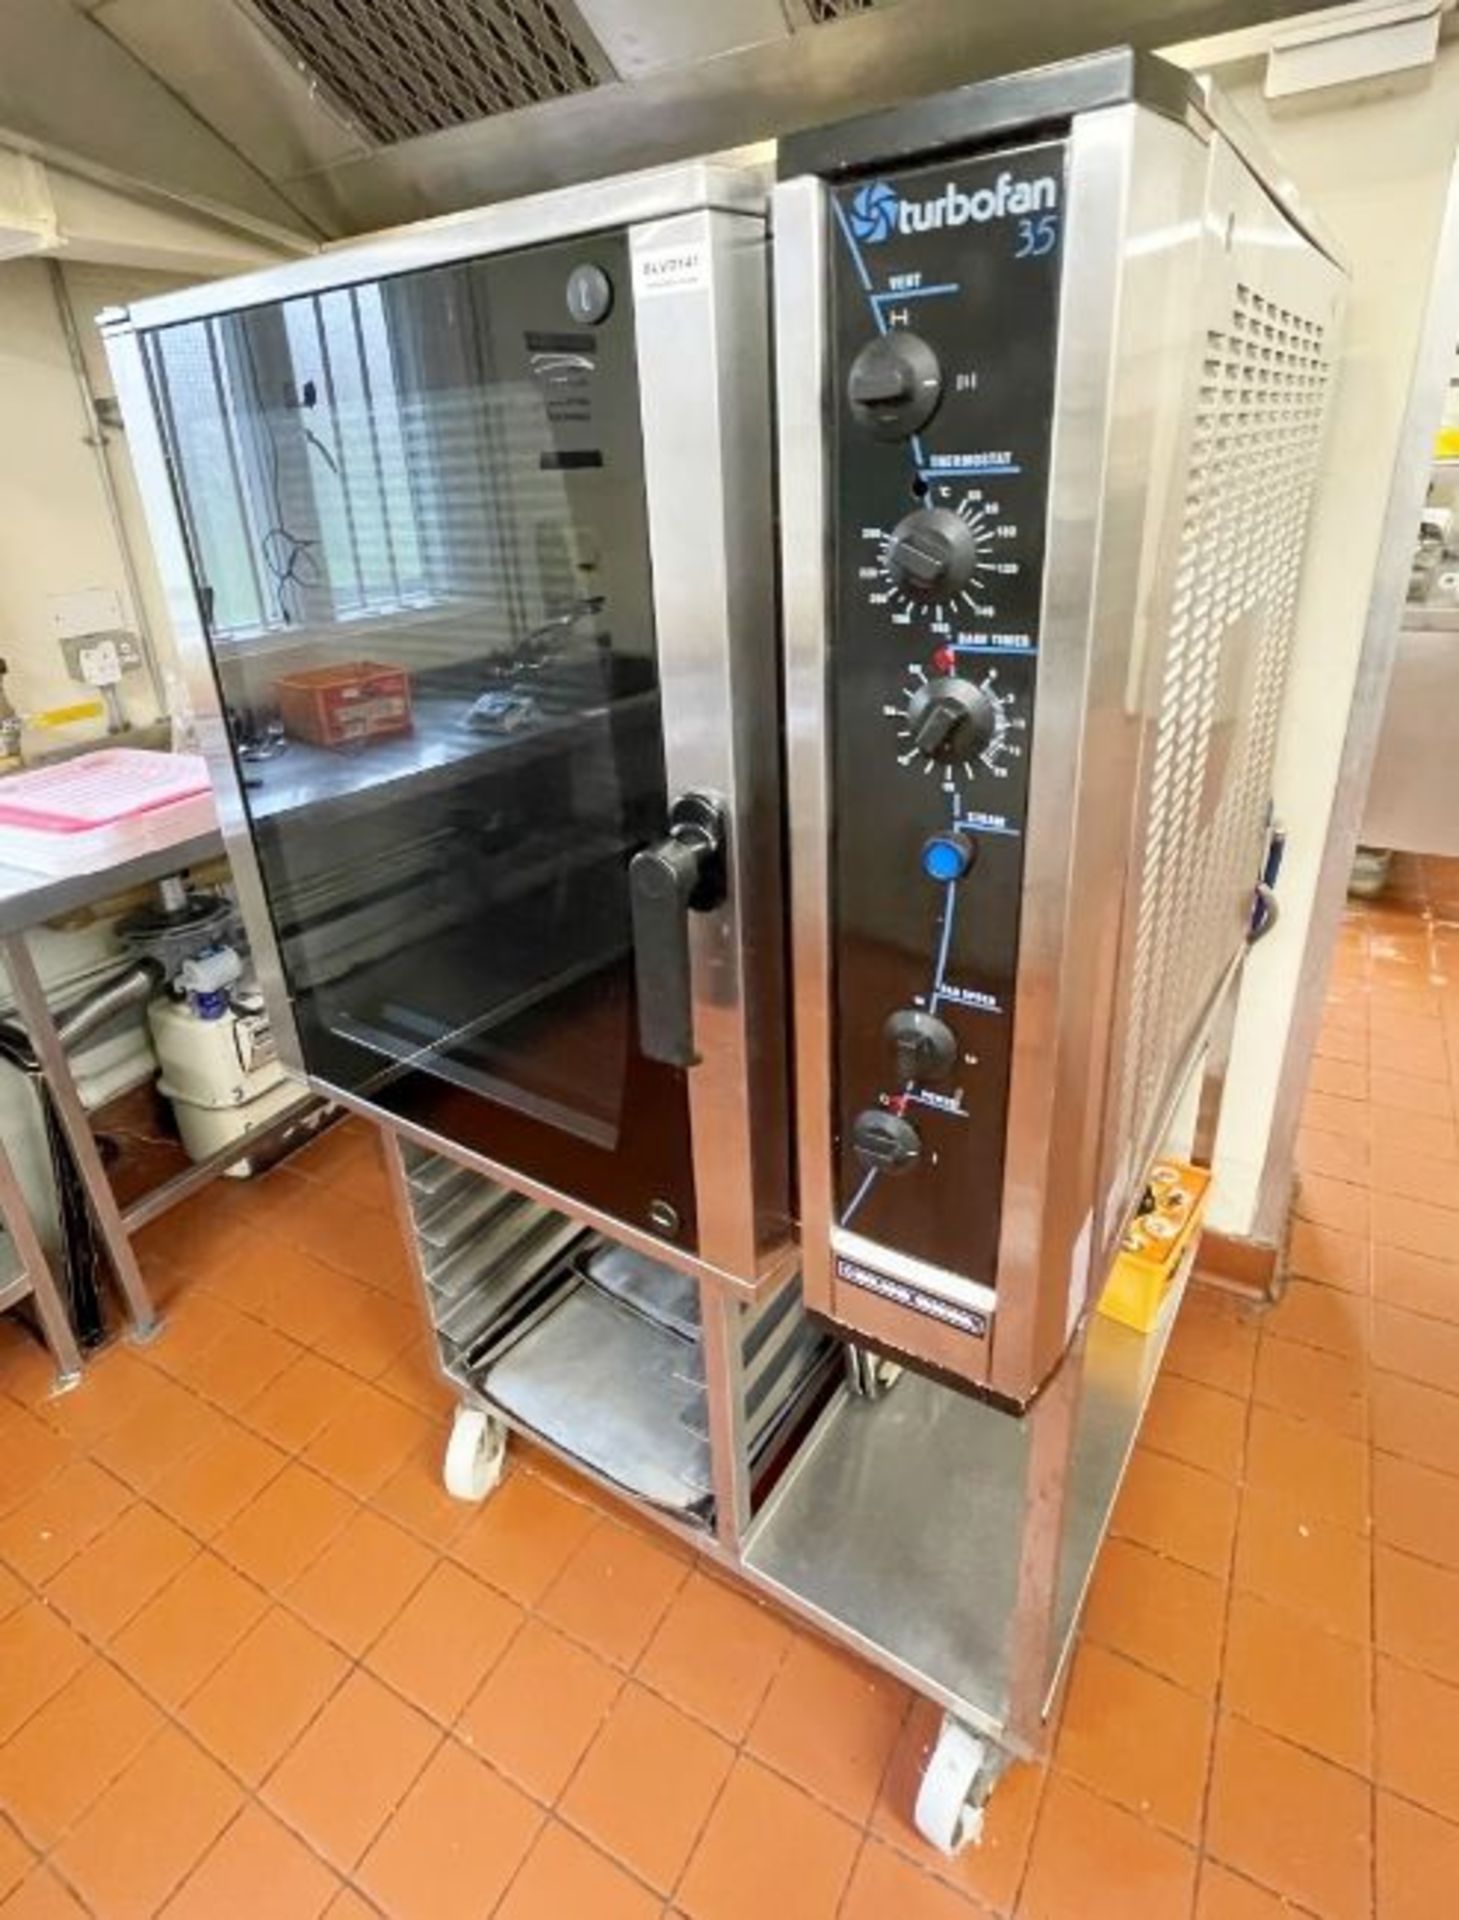 1 x Blue Seal Moffat Turbofan E35 Convection Oven With Stand - Model E35-30-453 - 400v Power - - Image 11 of 16